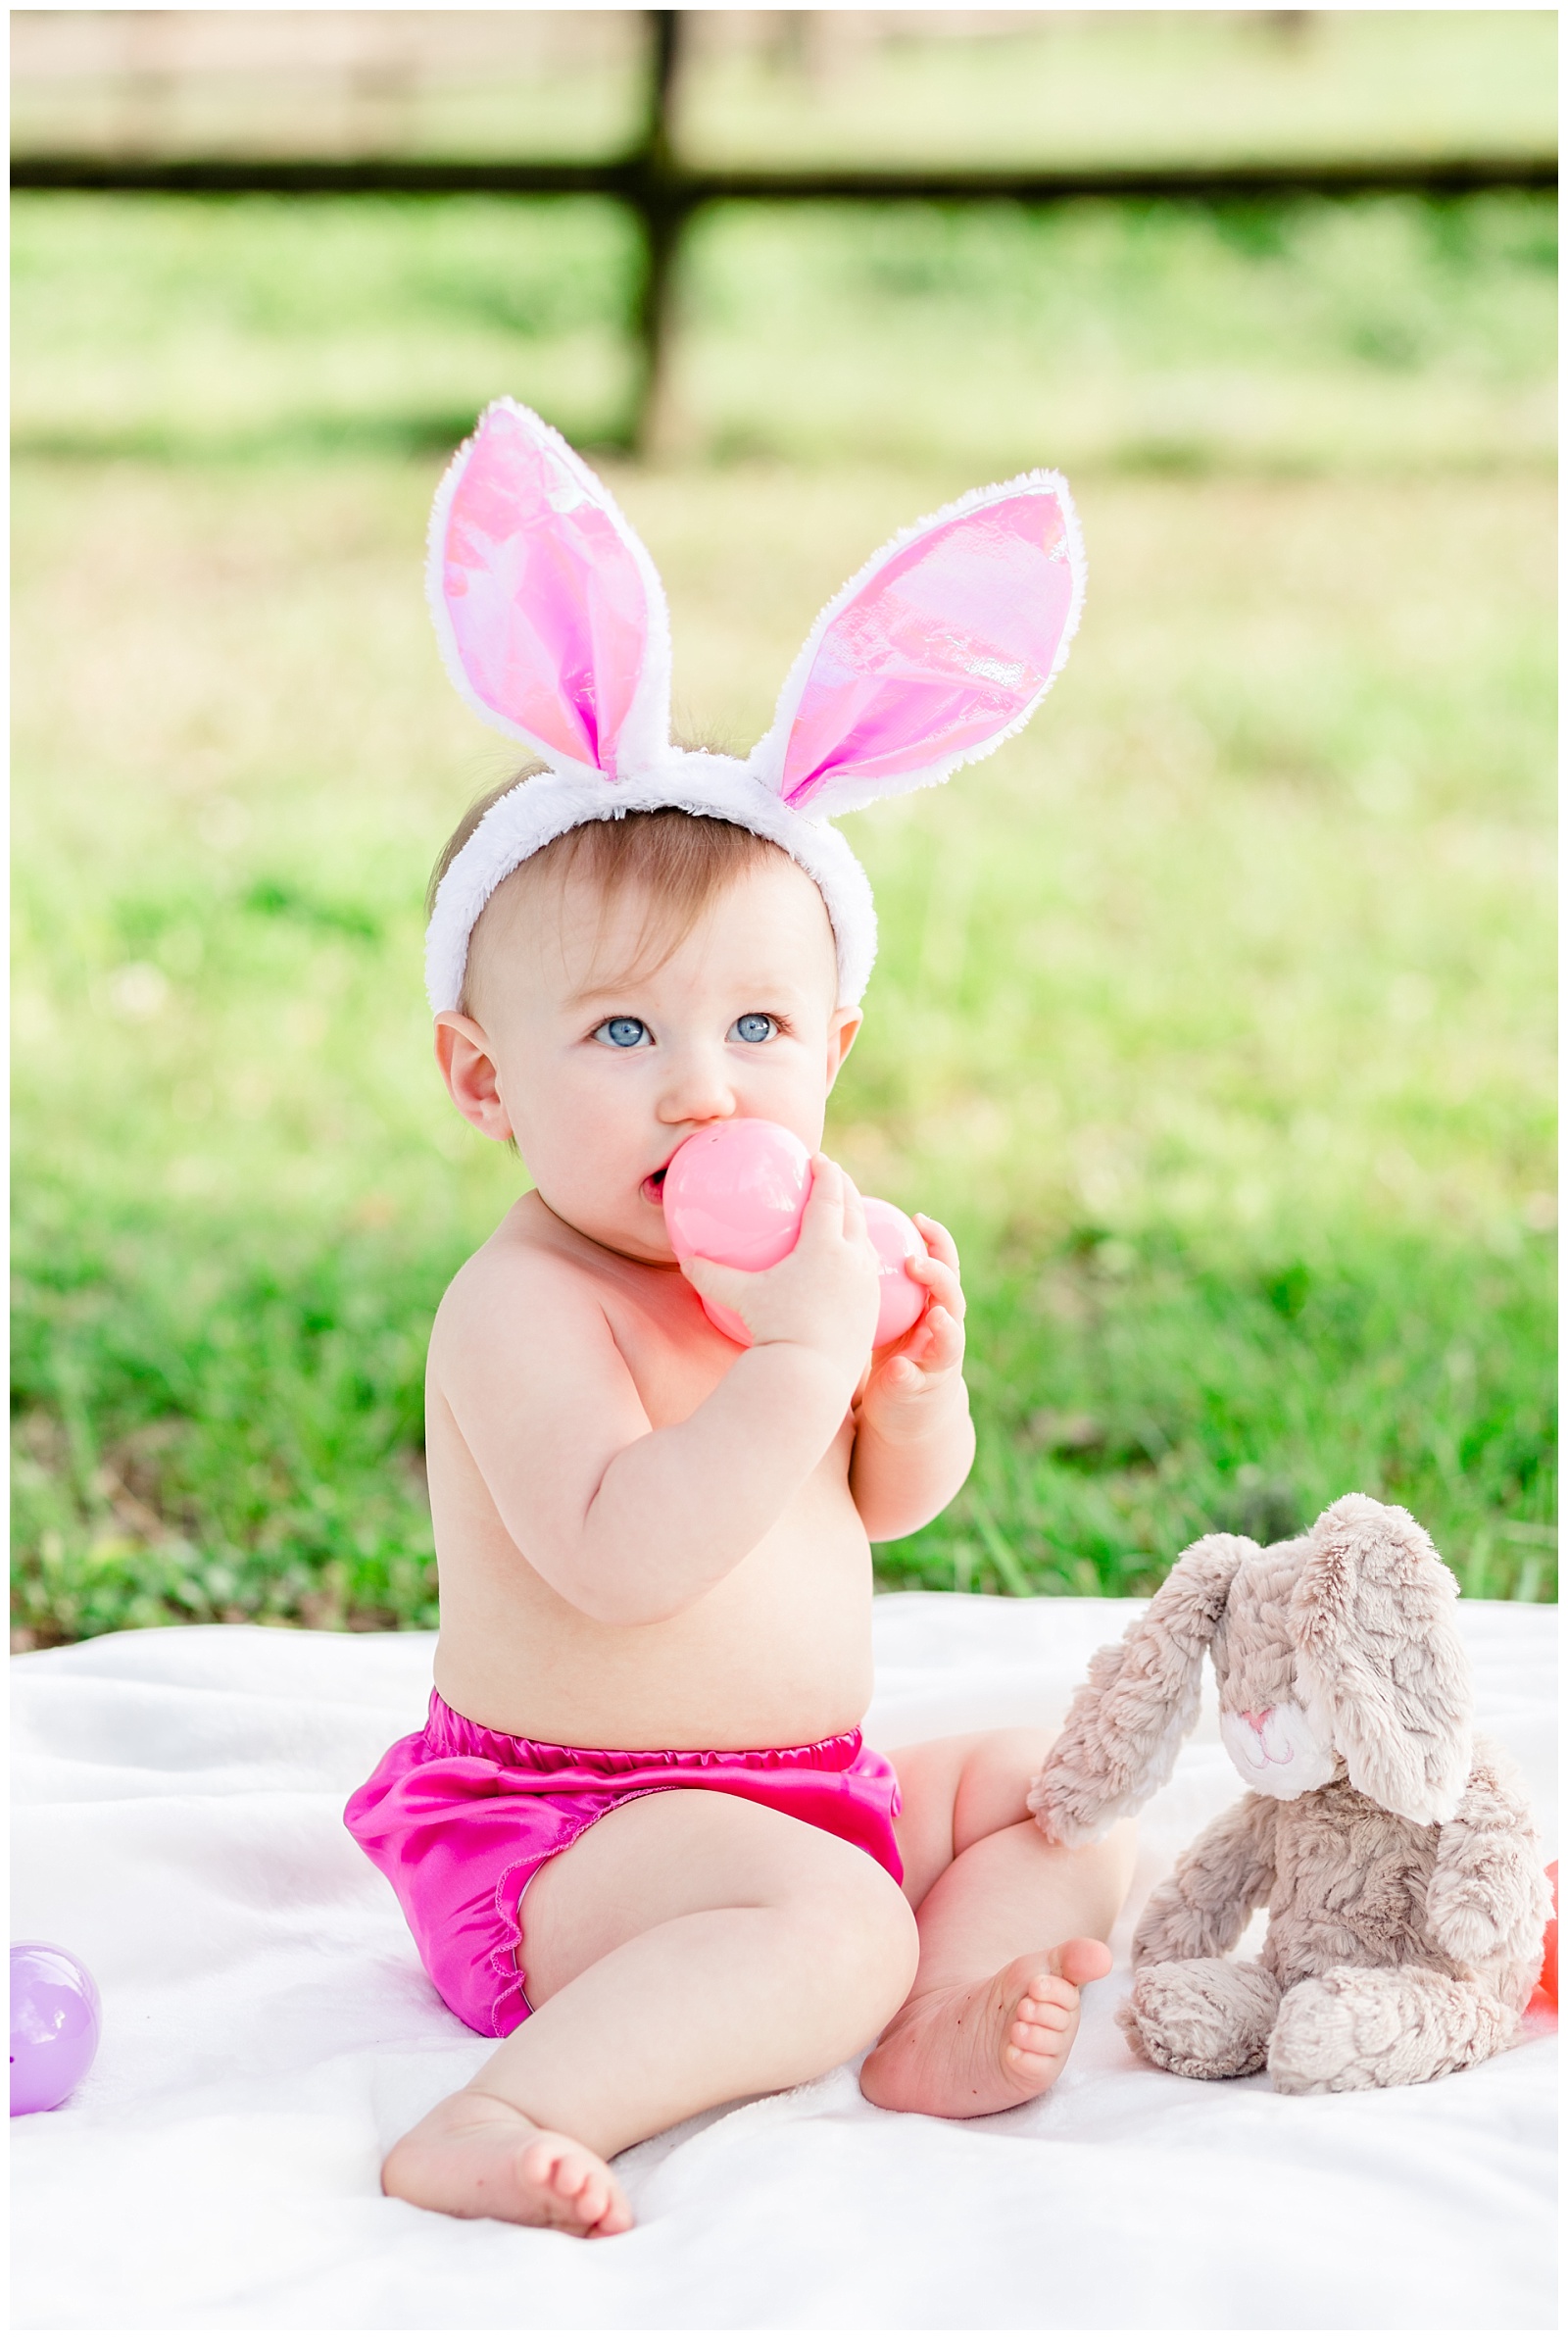 Easter Spring One Year Old Birthday Session for Baby Girl with Different Shades of Pink, Easter Eggs and Bunny Ears